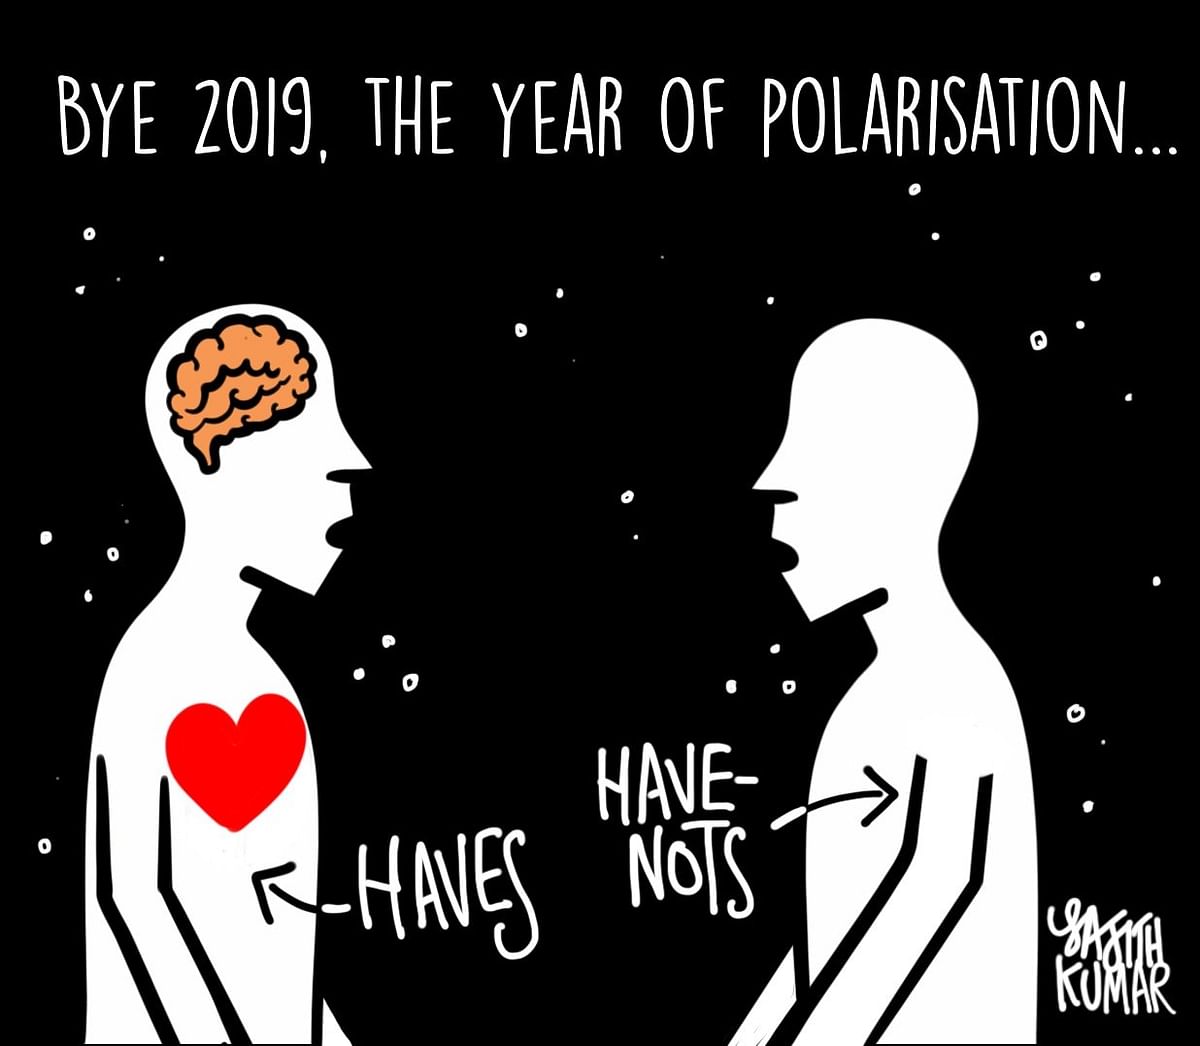 Goodbye, 2019: Year of polarisation, haves & have-notes